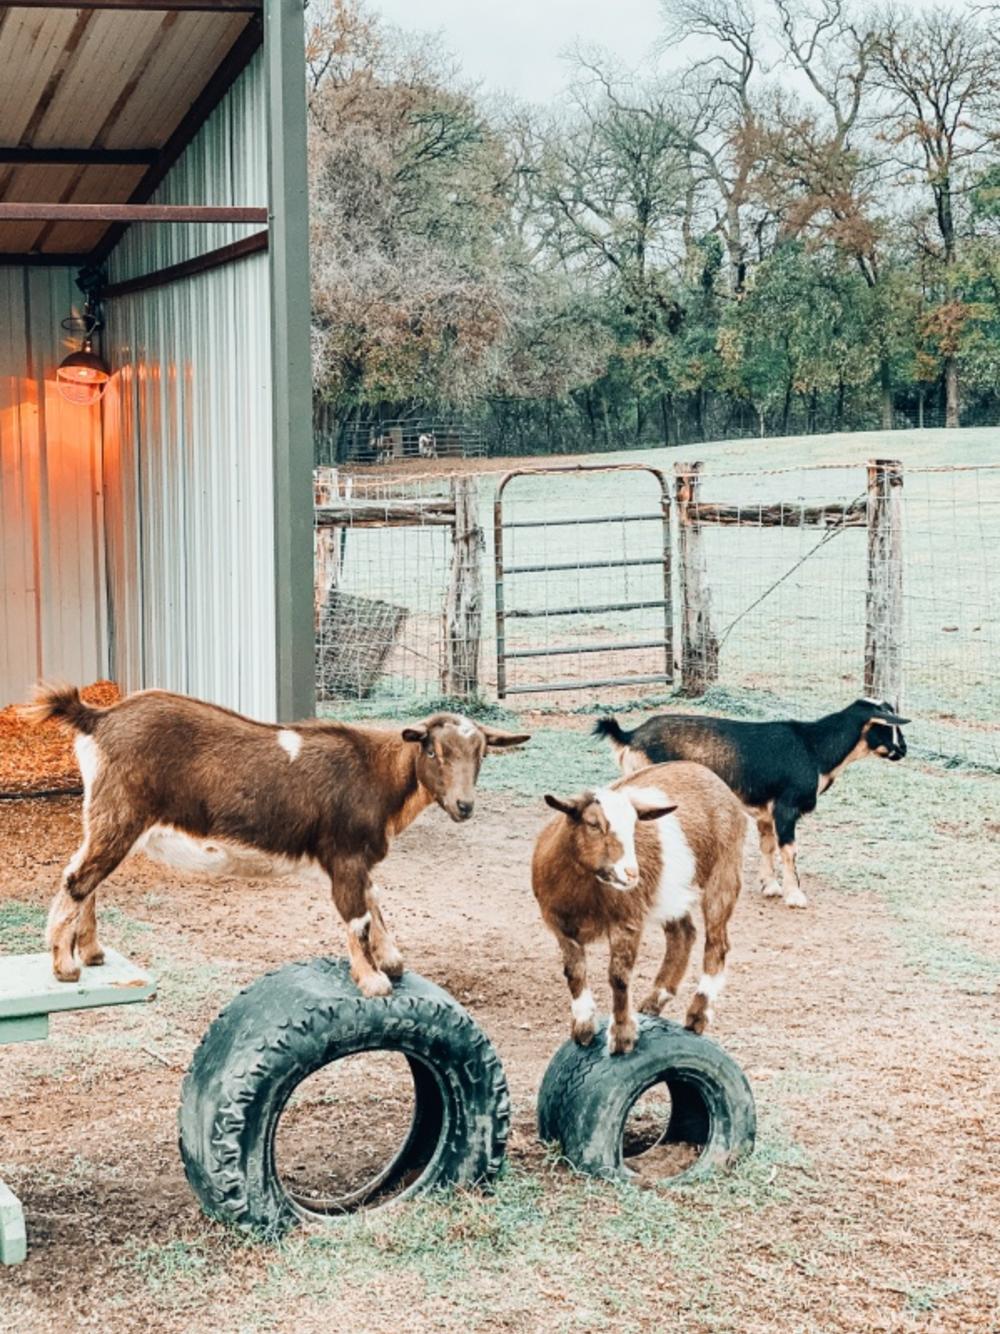 Two goats standing on tires in a barn